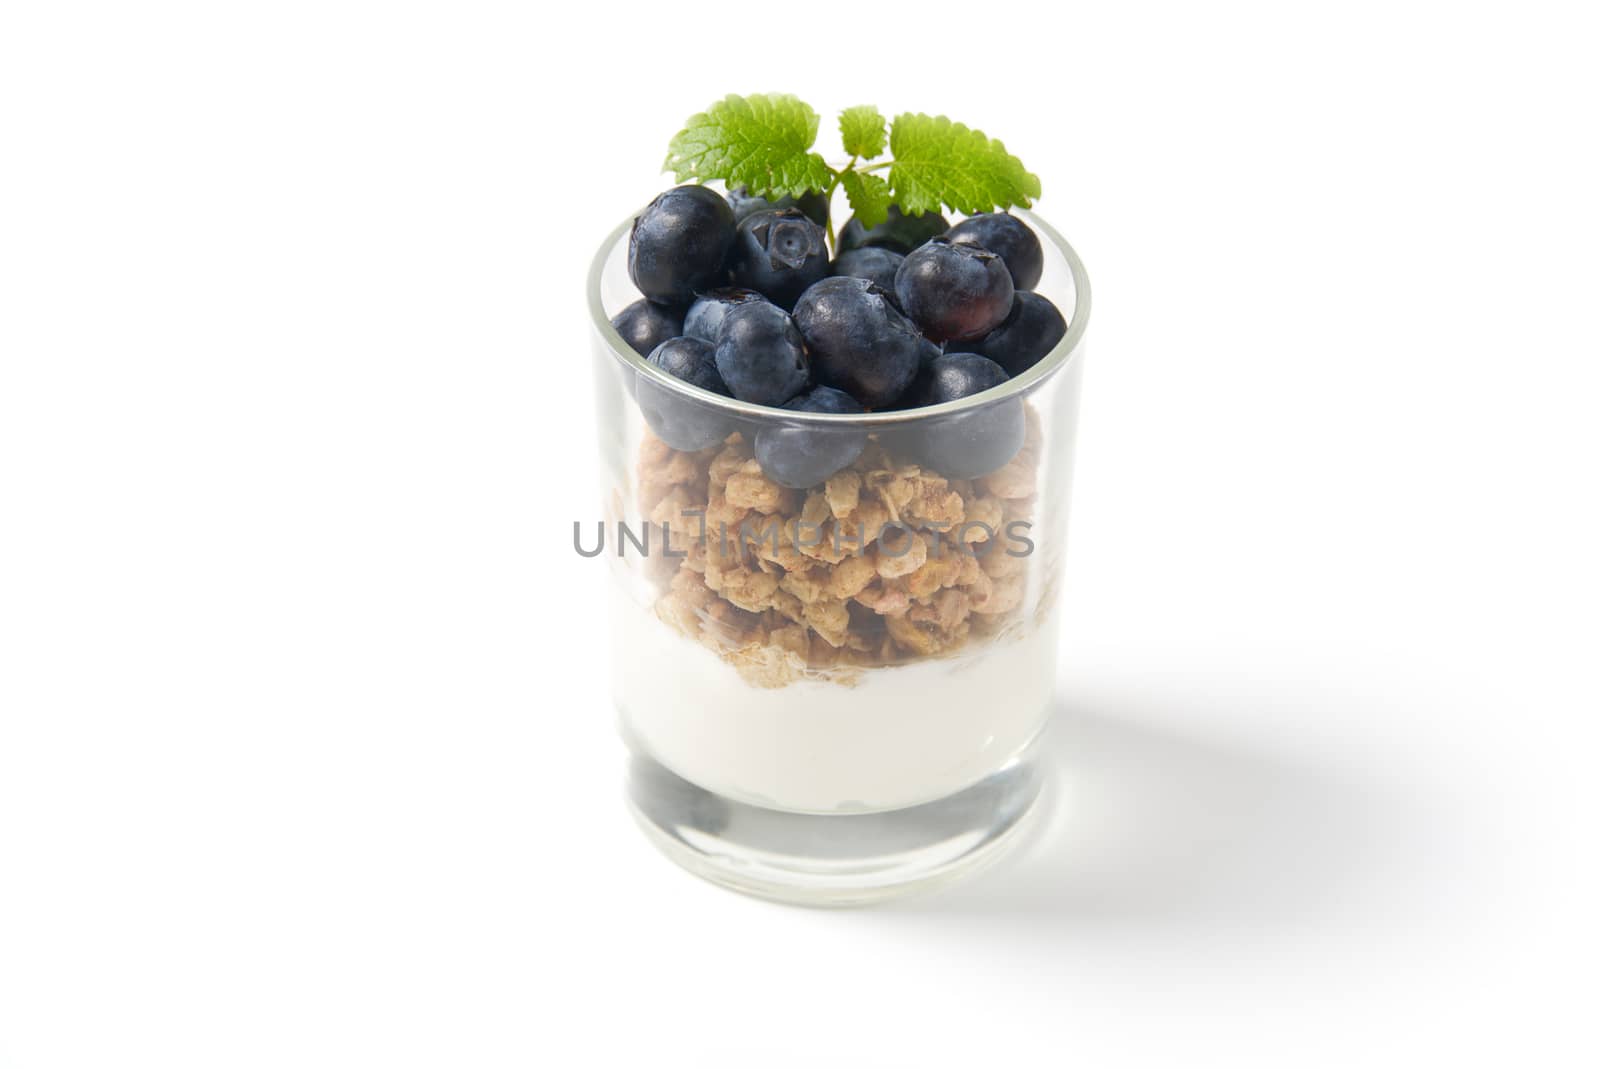 muesli dessert with yogurt and blueberry in a glass over white background. Granola in glass with berries and yogurt. by PhotoTime